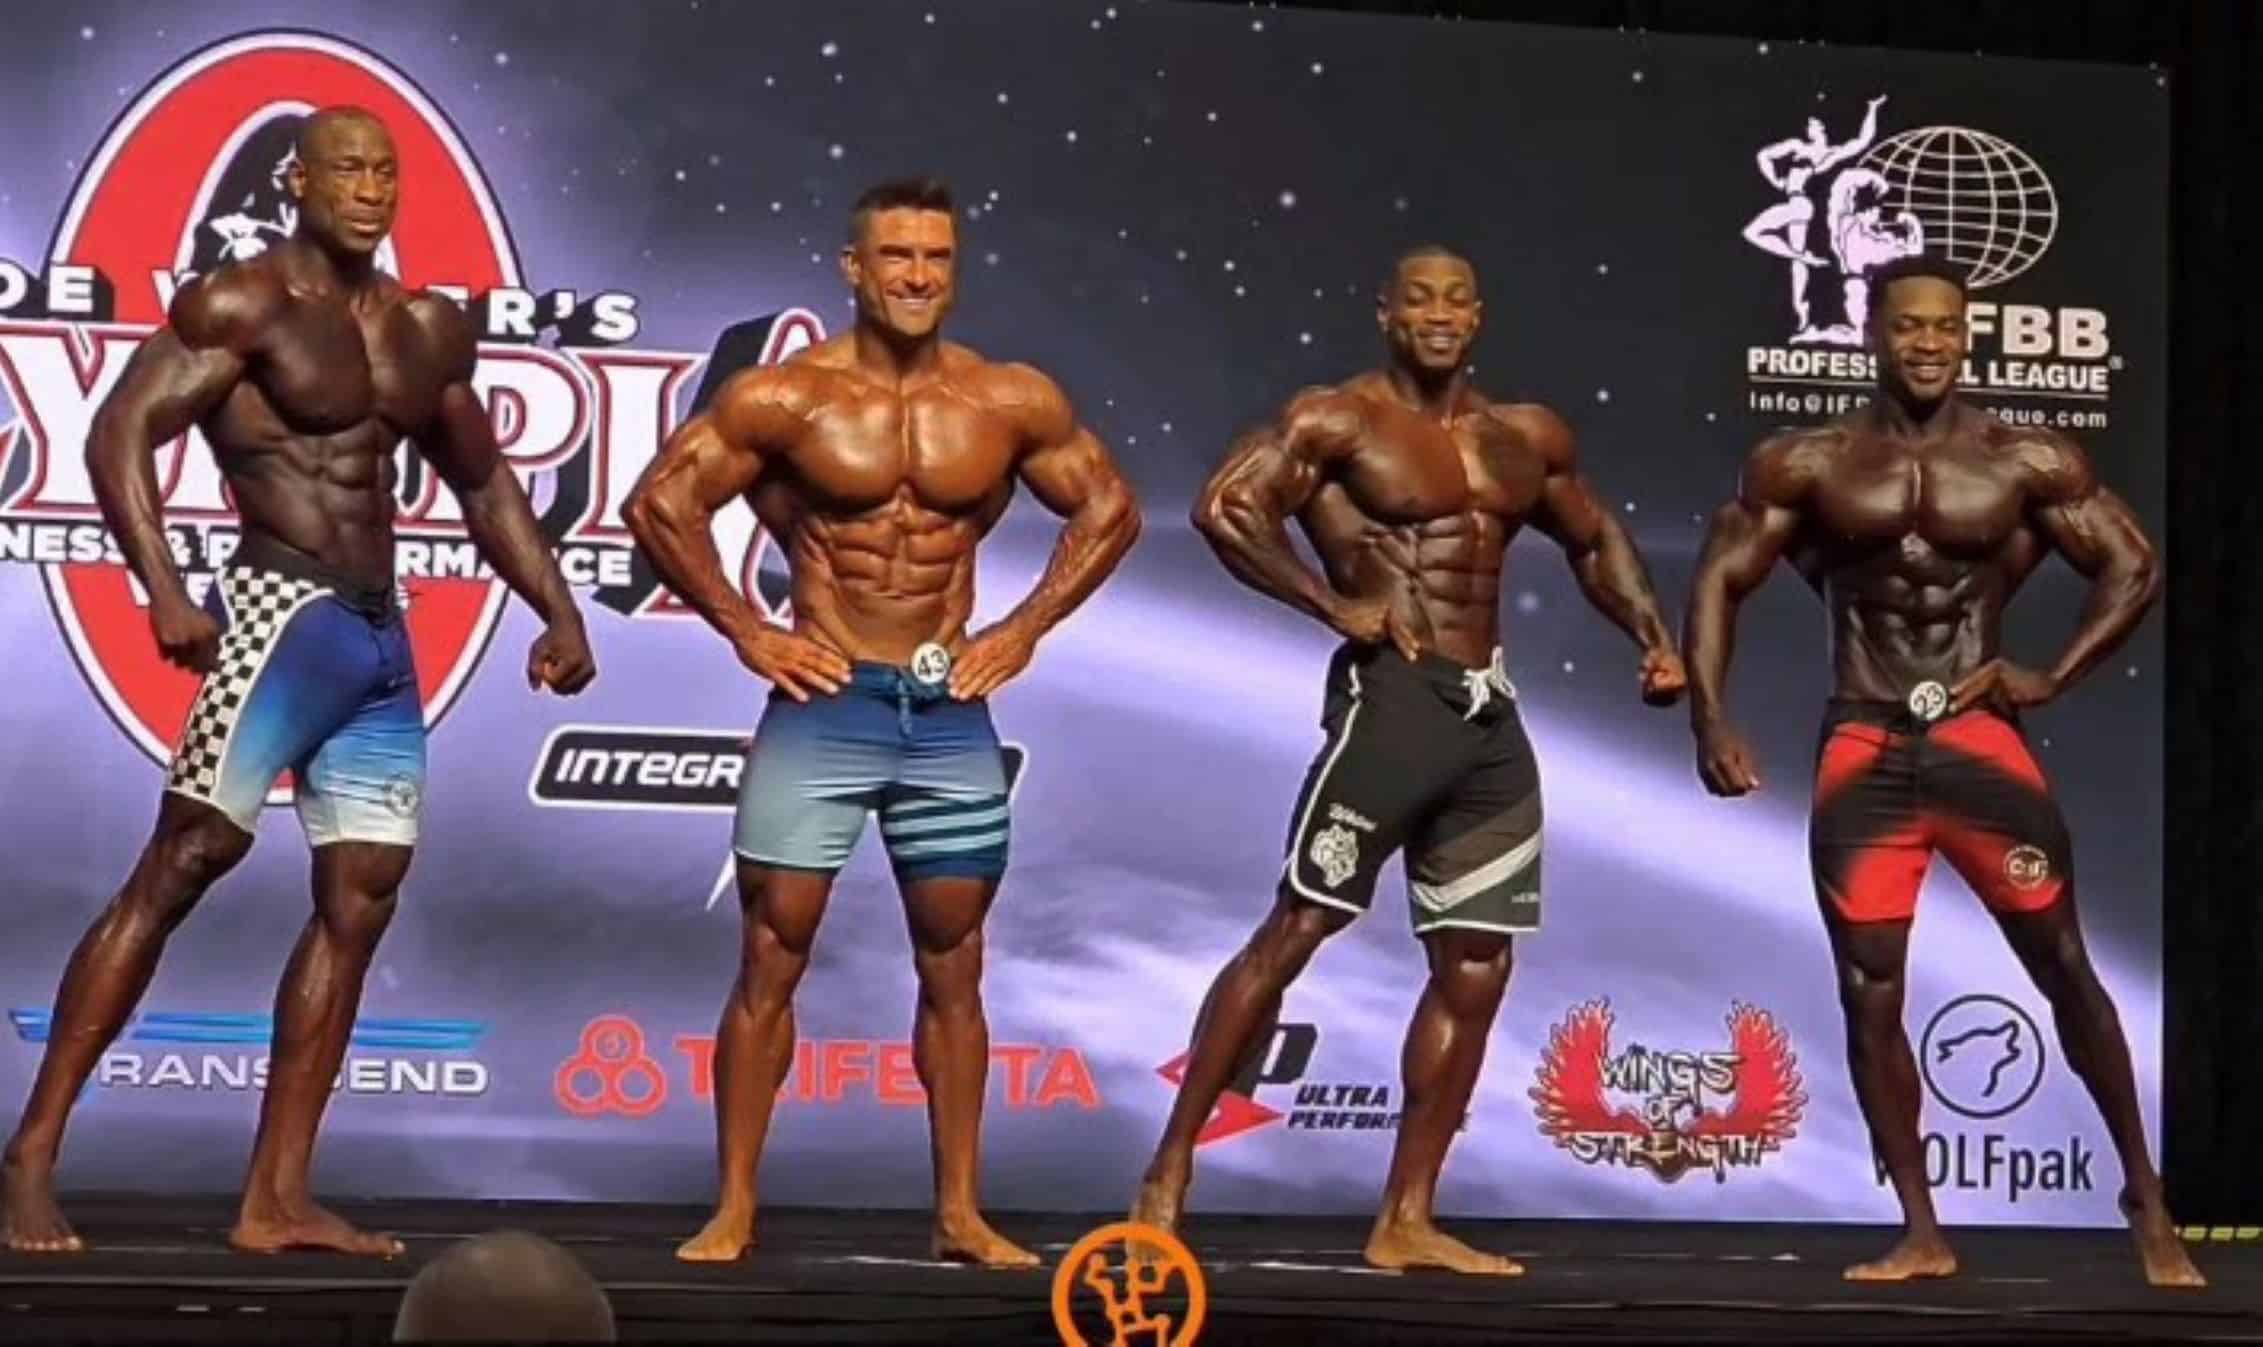 2023 Masters Olympia Results For All Divisions – Fitness Volt